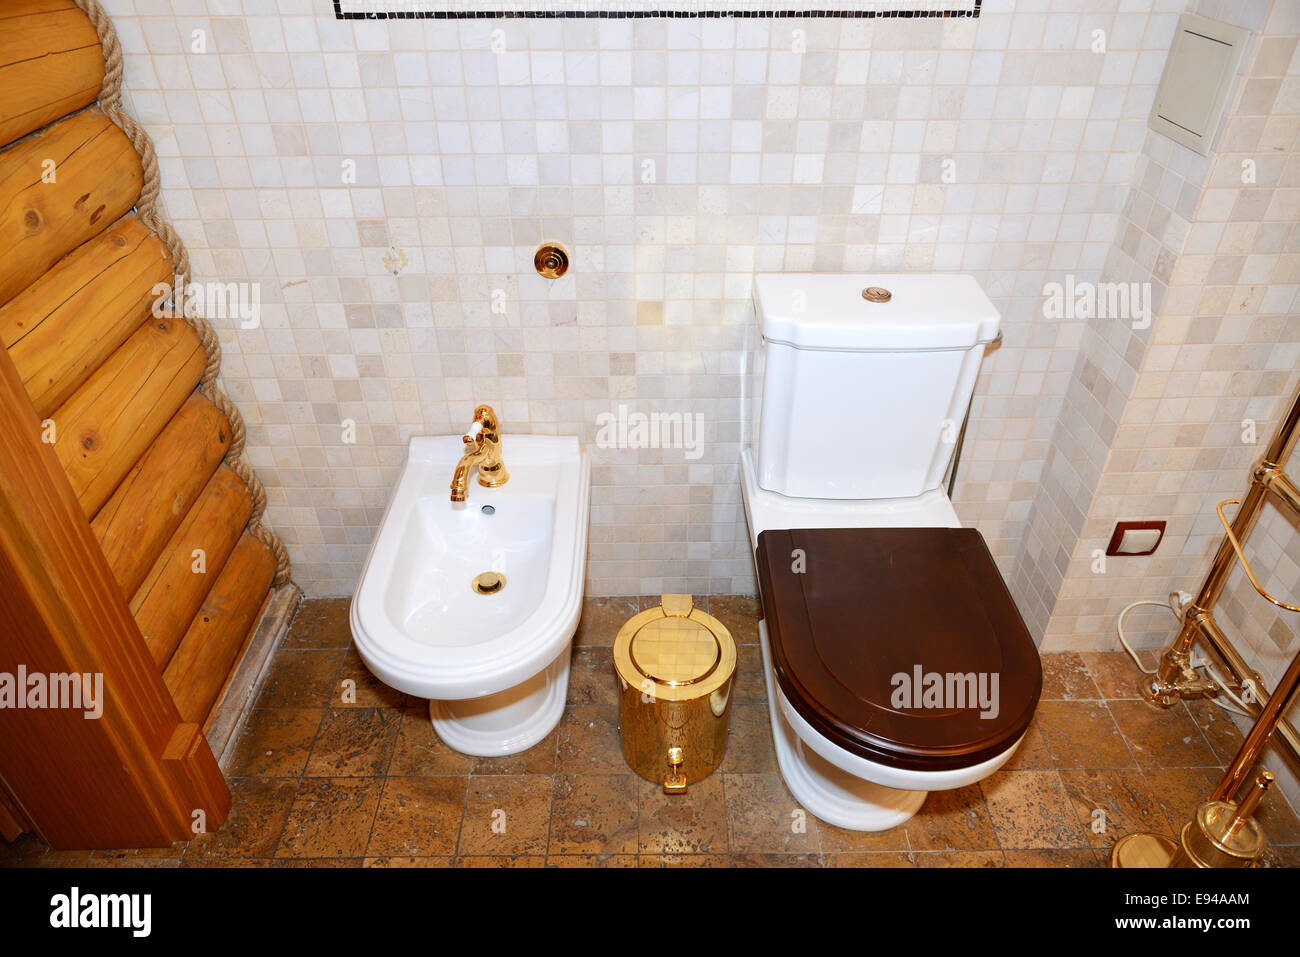 Gold Toilet Stock Photos and Pictures - 7,709 Images